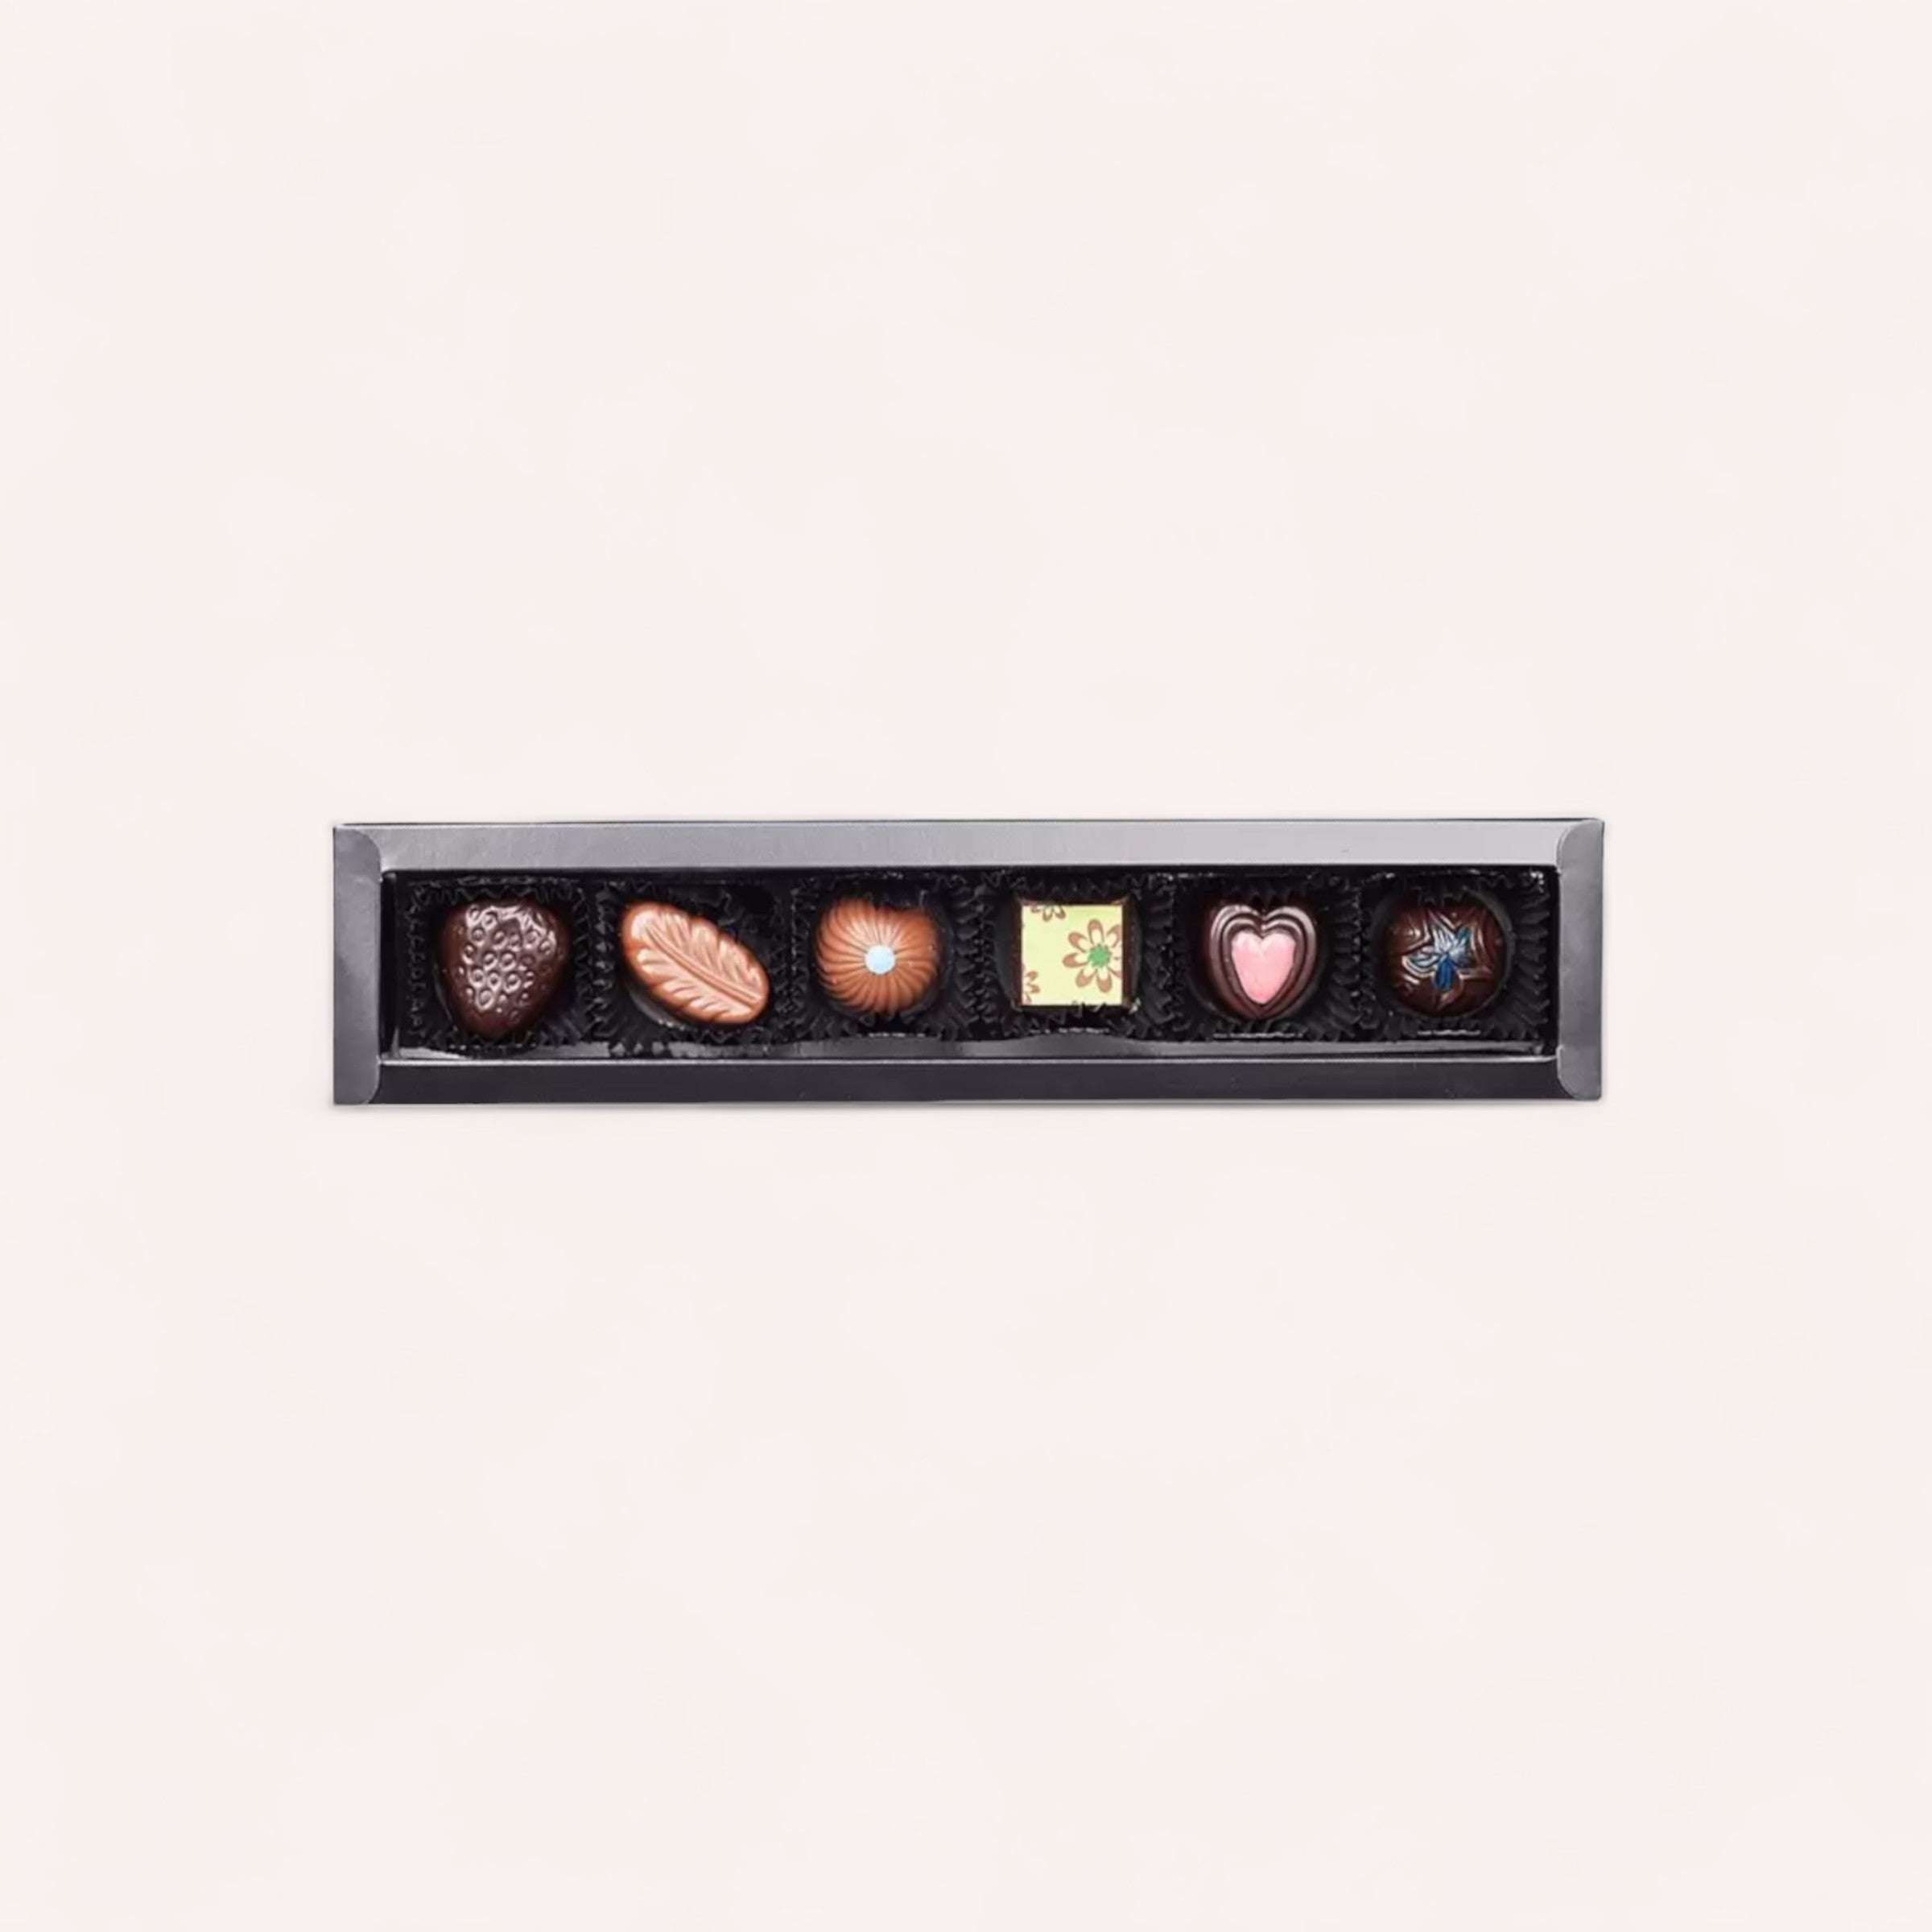 A selection of Chocolate Traders' 6 Piece Chocolate Box, featuring gourmet New Zealand chocolates in a sleek black box, intricate designs, and a colorful heart-shaped piece, eloquently presented against a clean, white background.